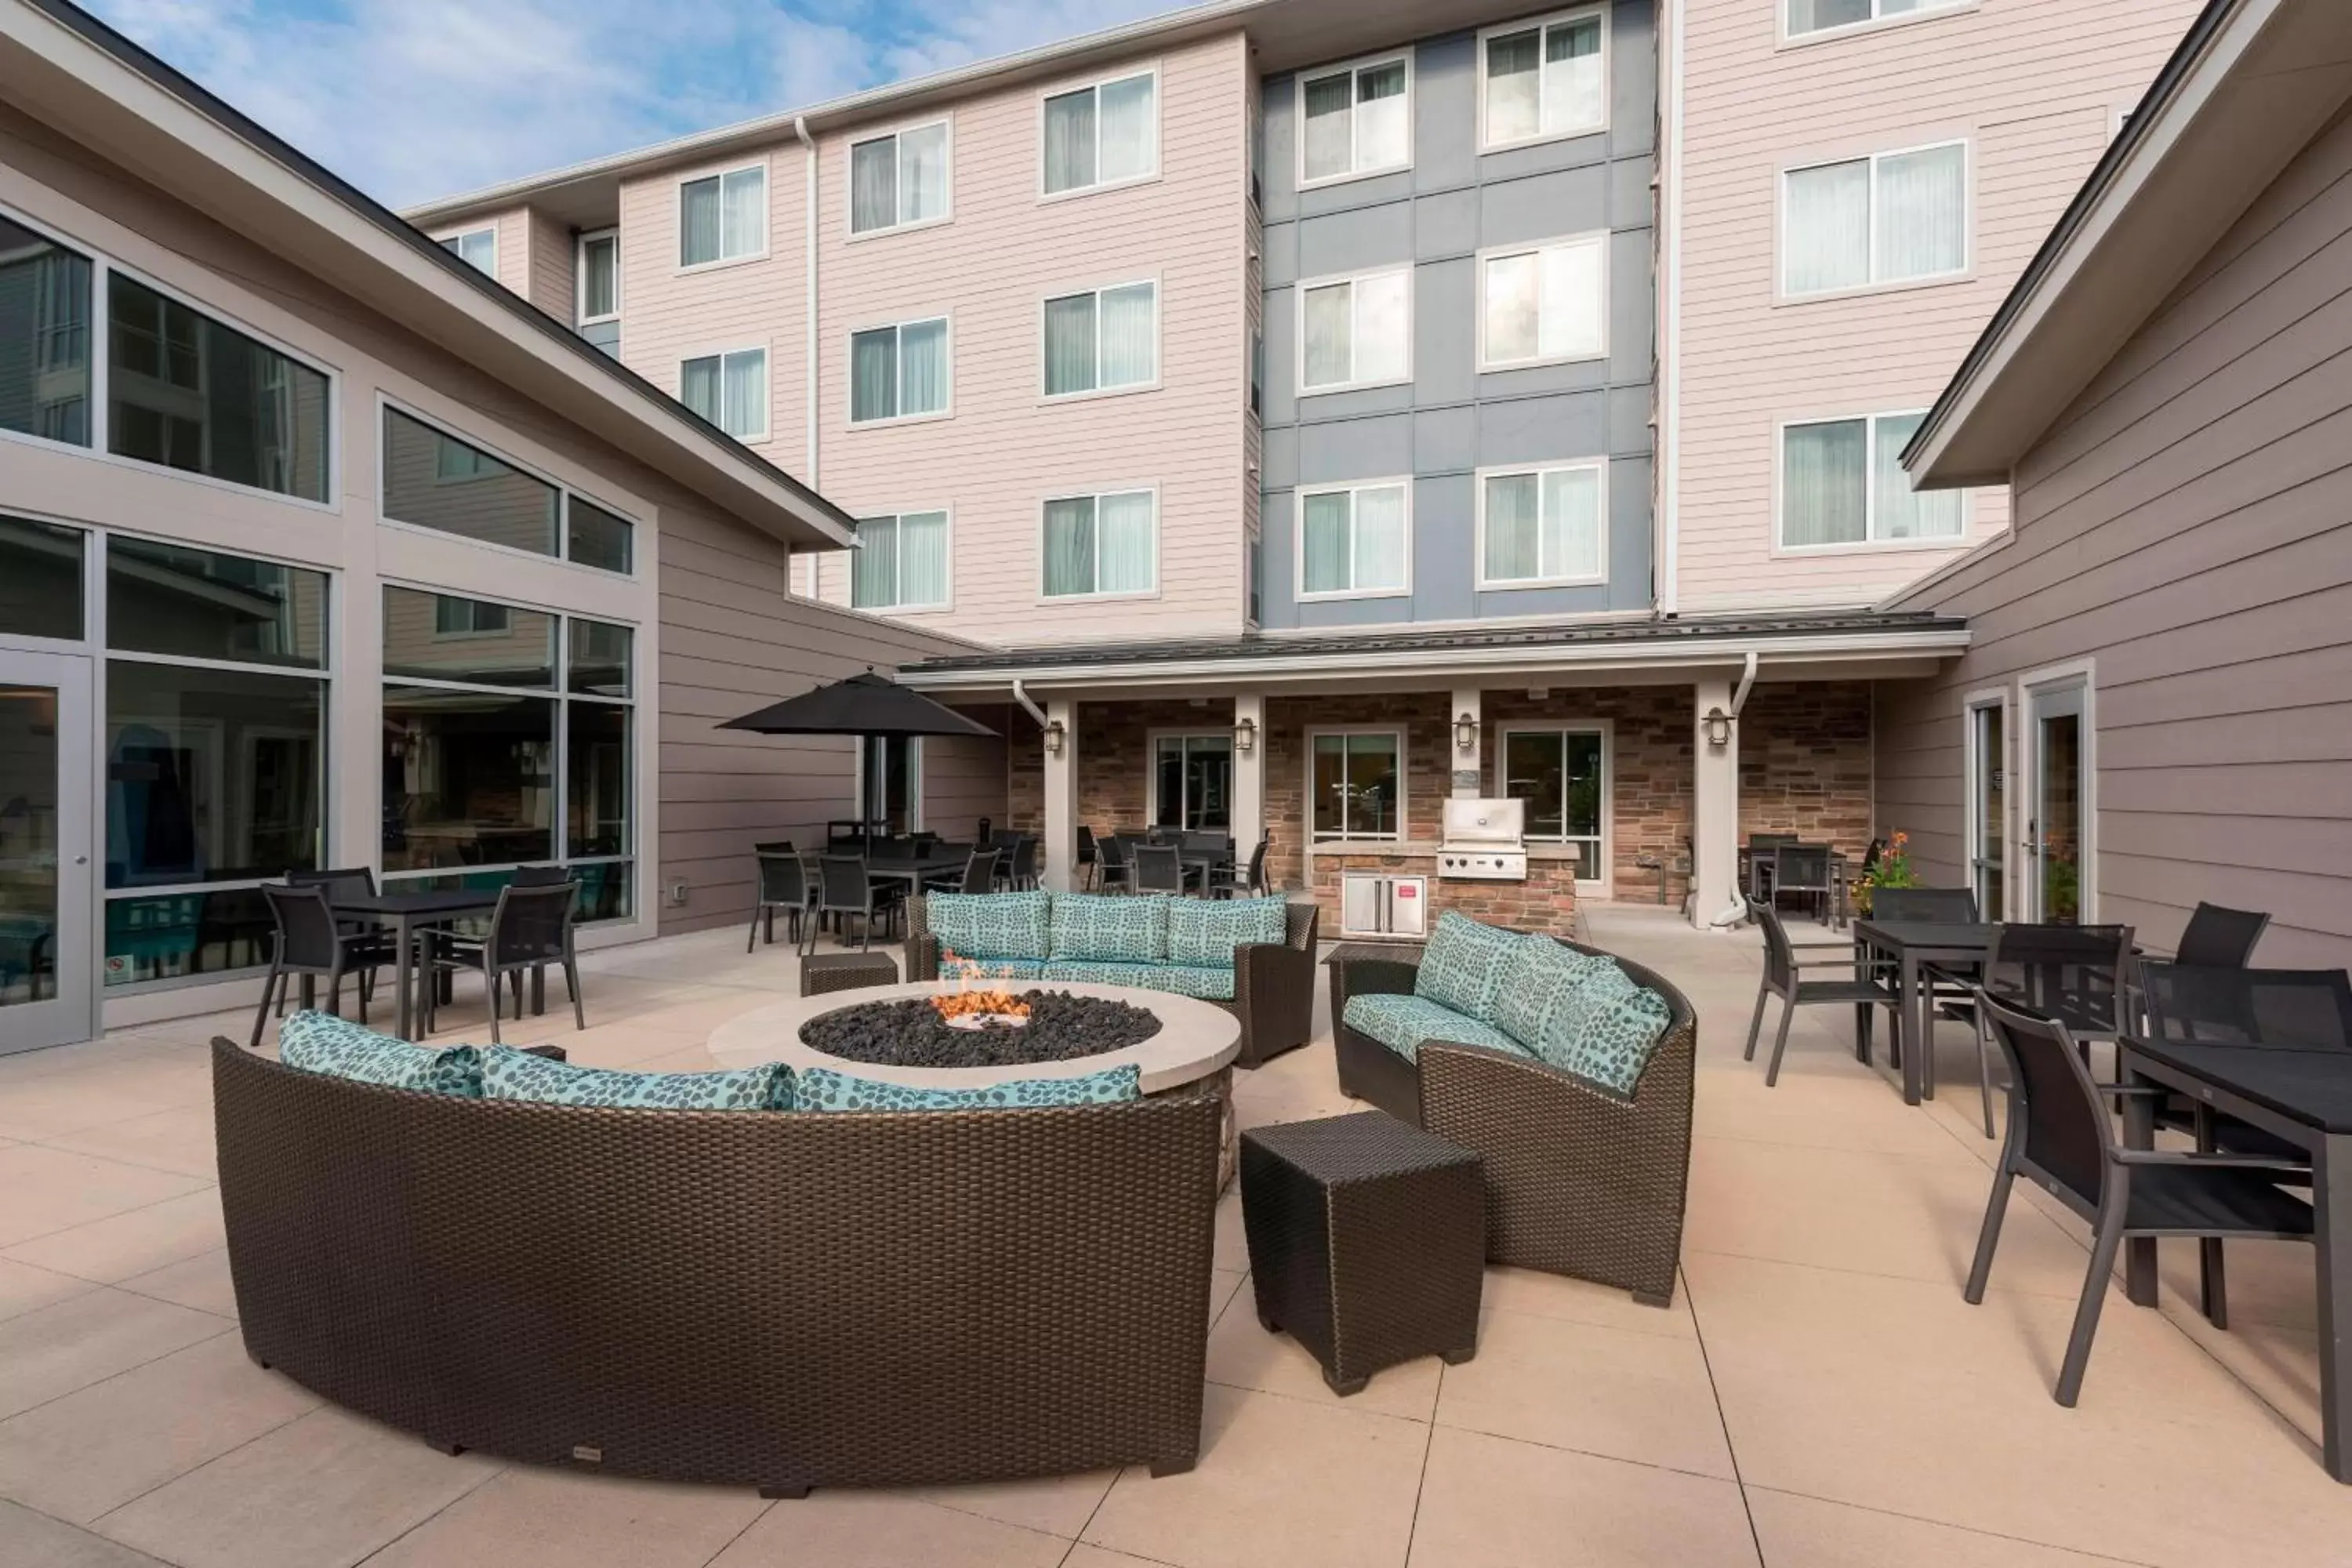 Property building in Residence Inn by Marriott Grand Rapids Airport